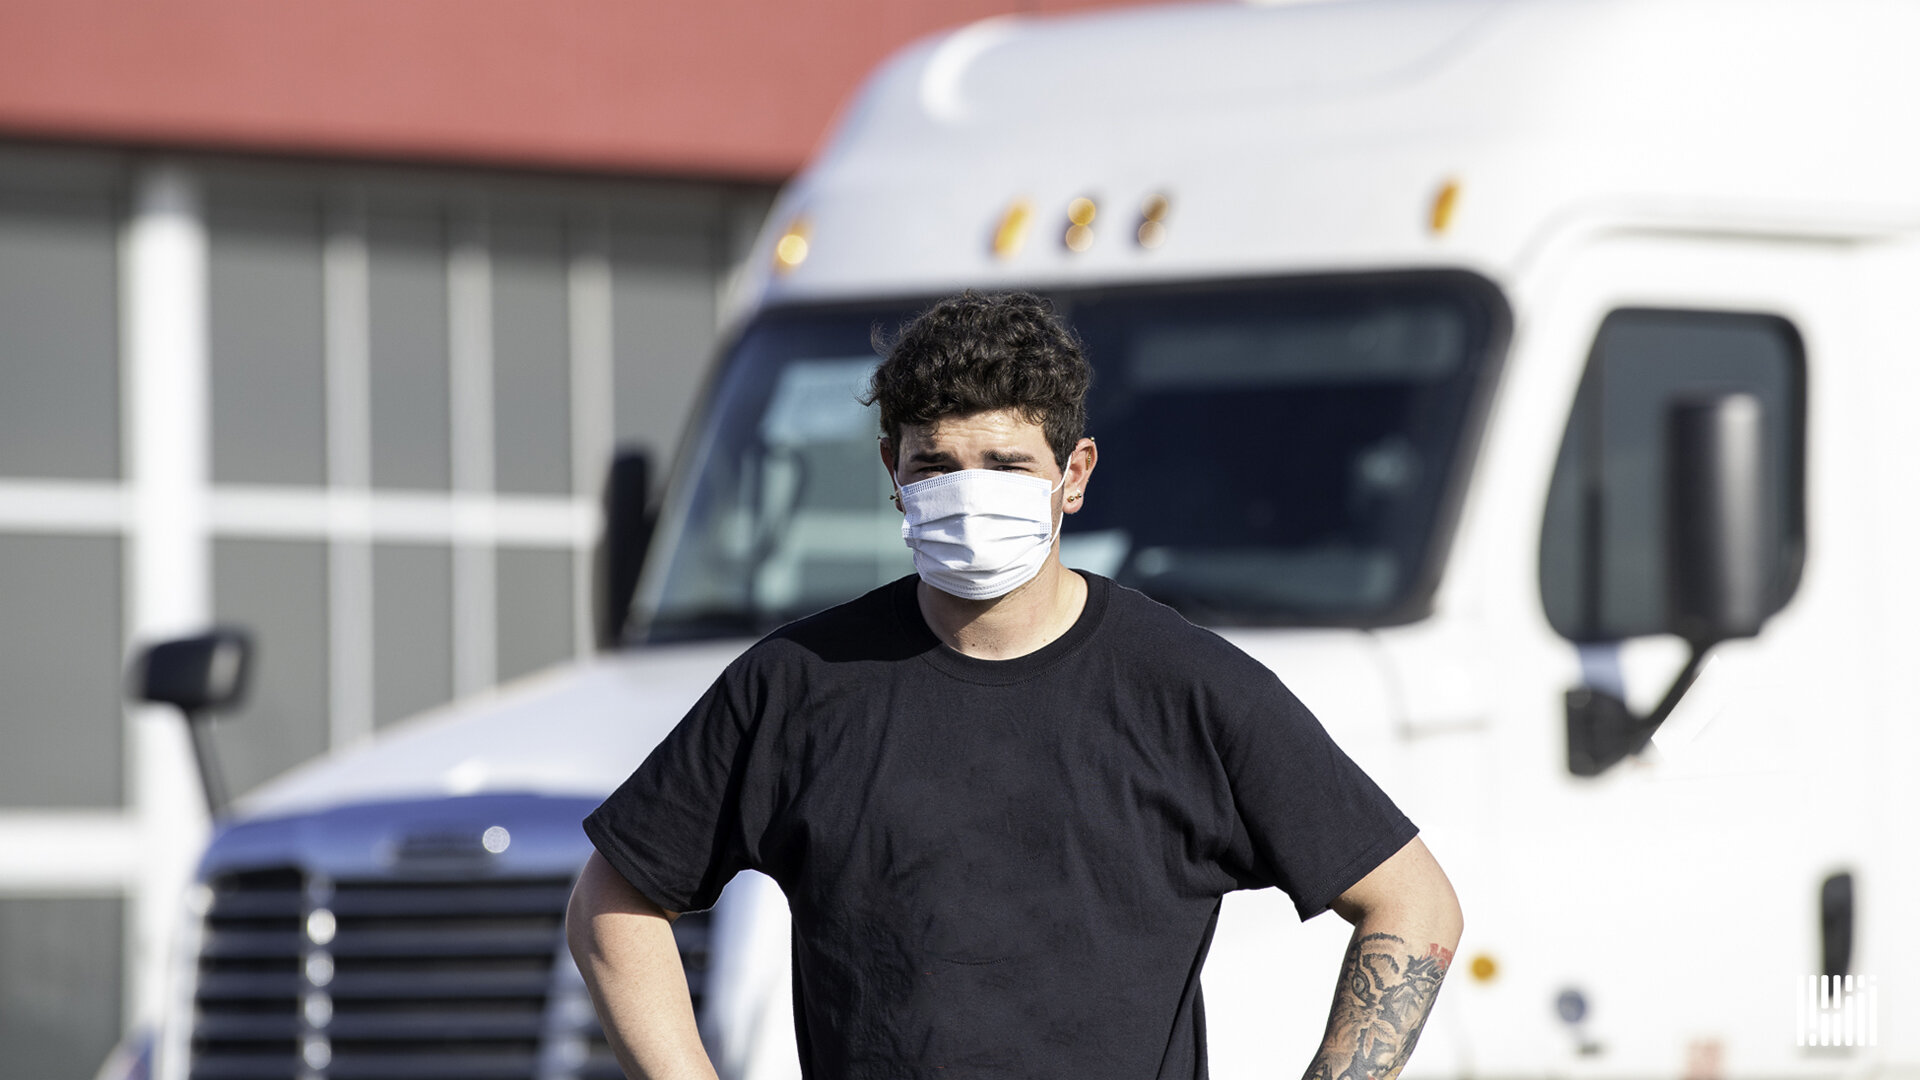 New guidelines from the CDC for employers reflect truck driver concerns. (Photo: Jim Allen/FreightWaves)